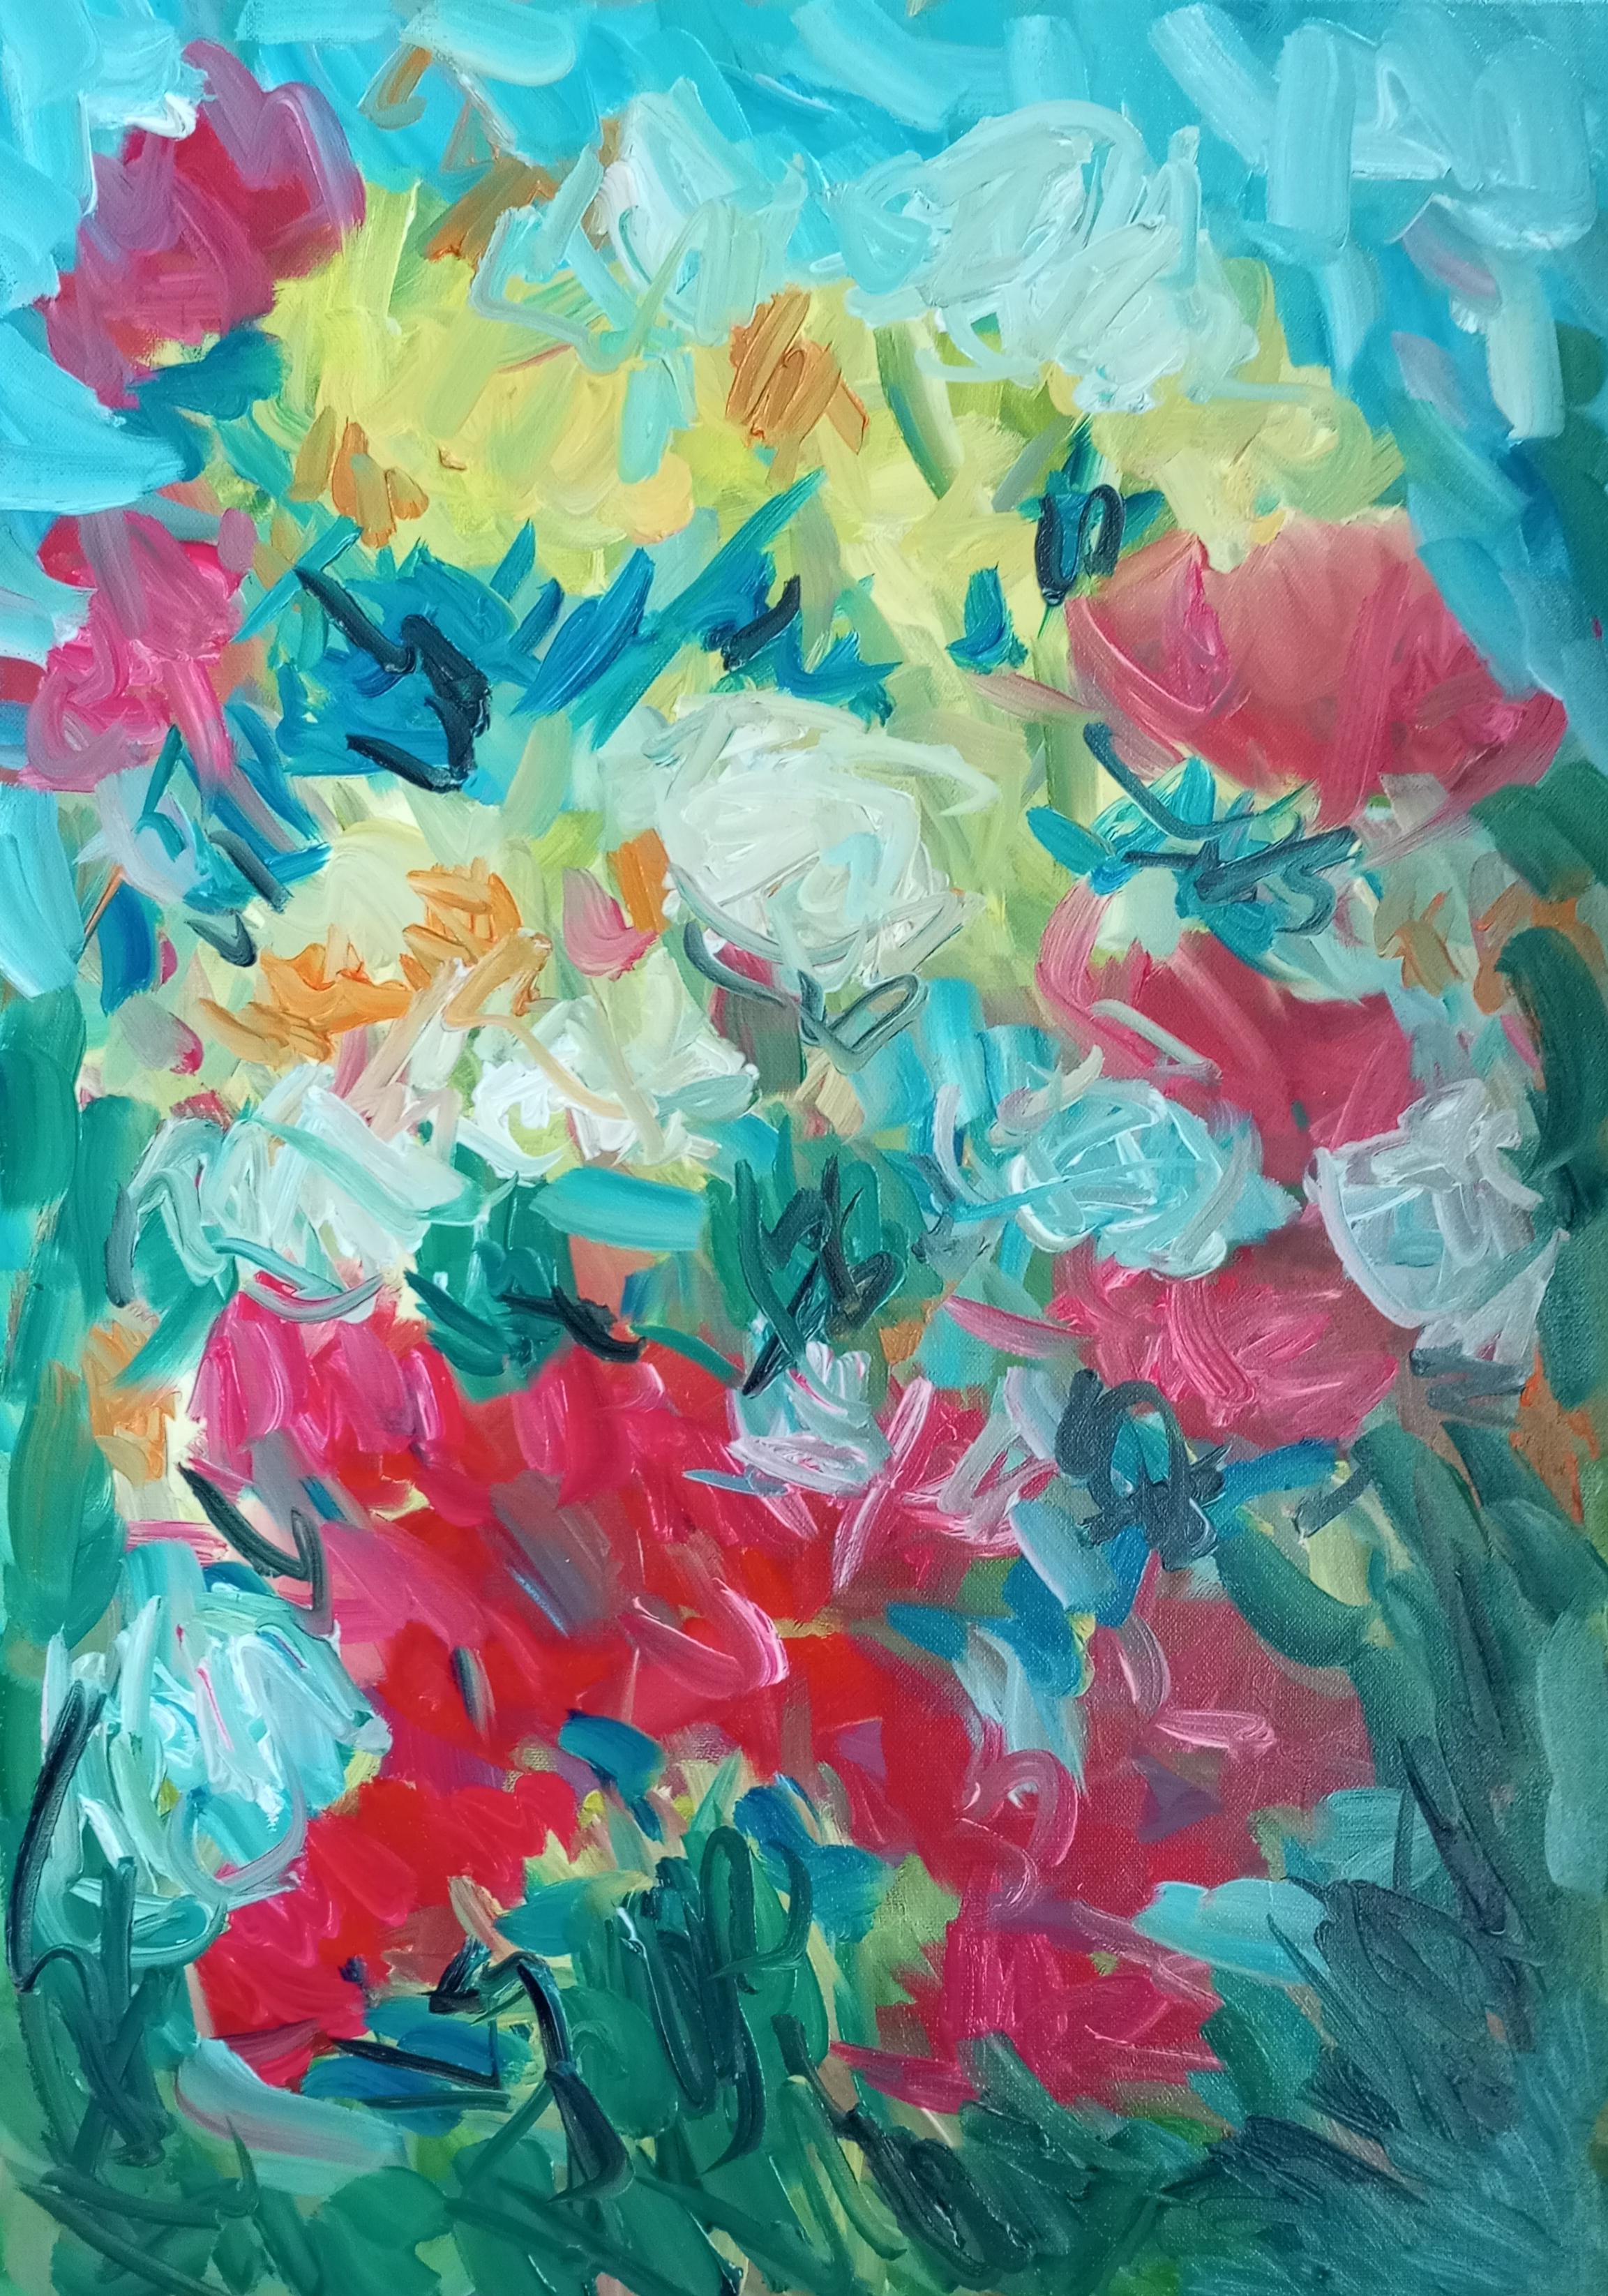 Natalya Mougenot  Abstract Painting - Contemporary impressionist vibrant painting "Wind dancing with spring flowers" 